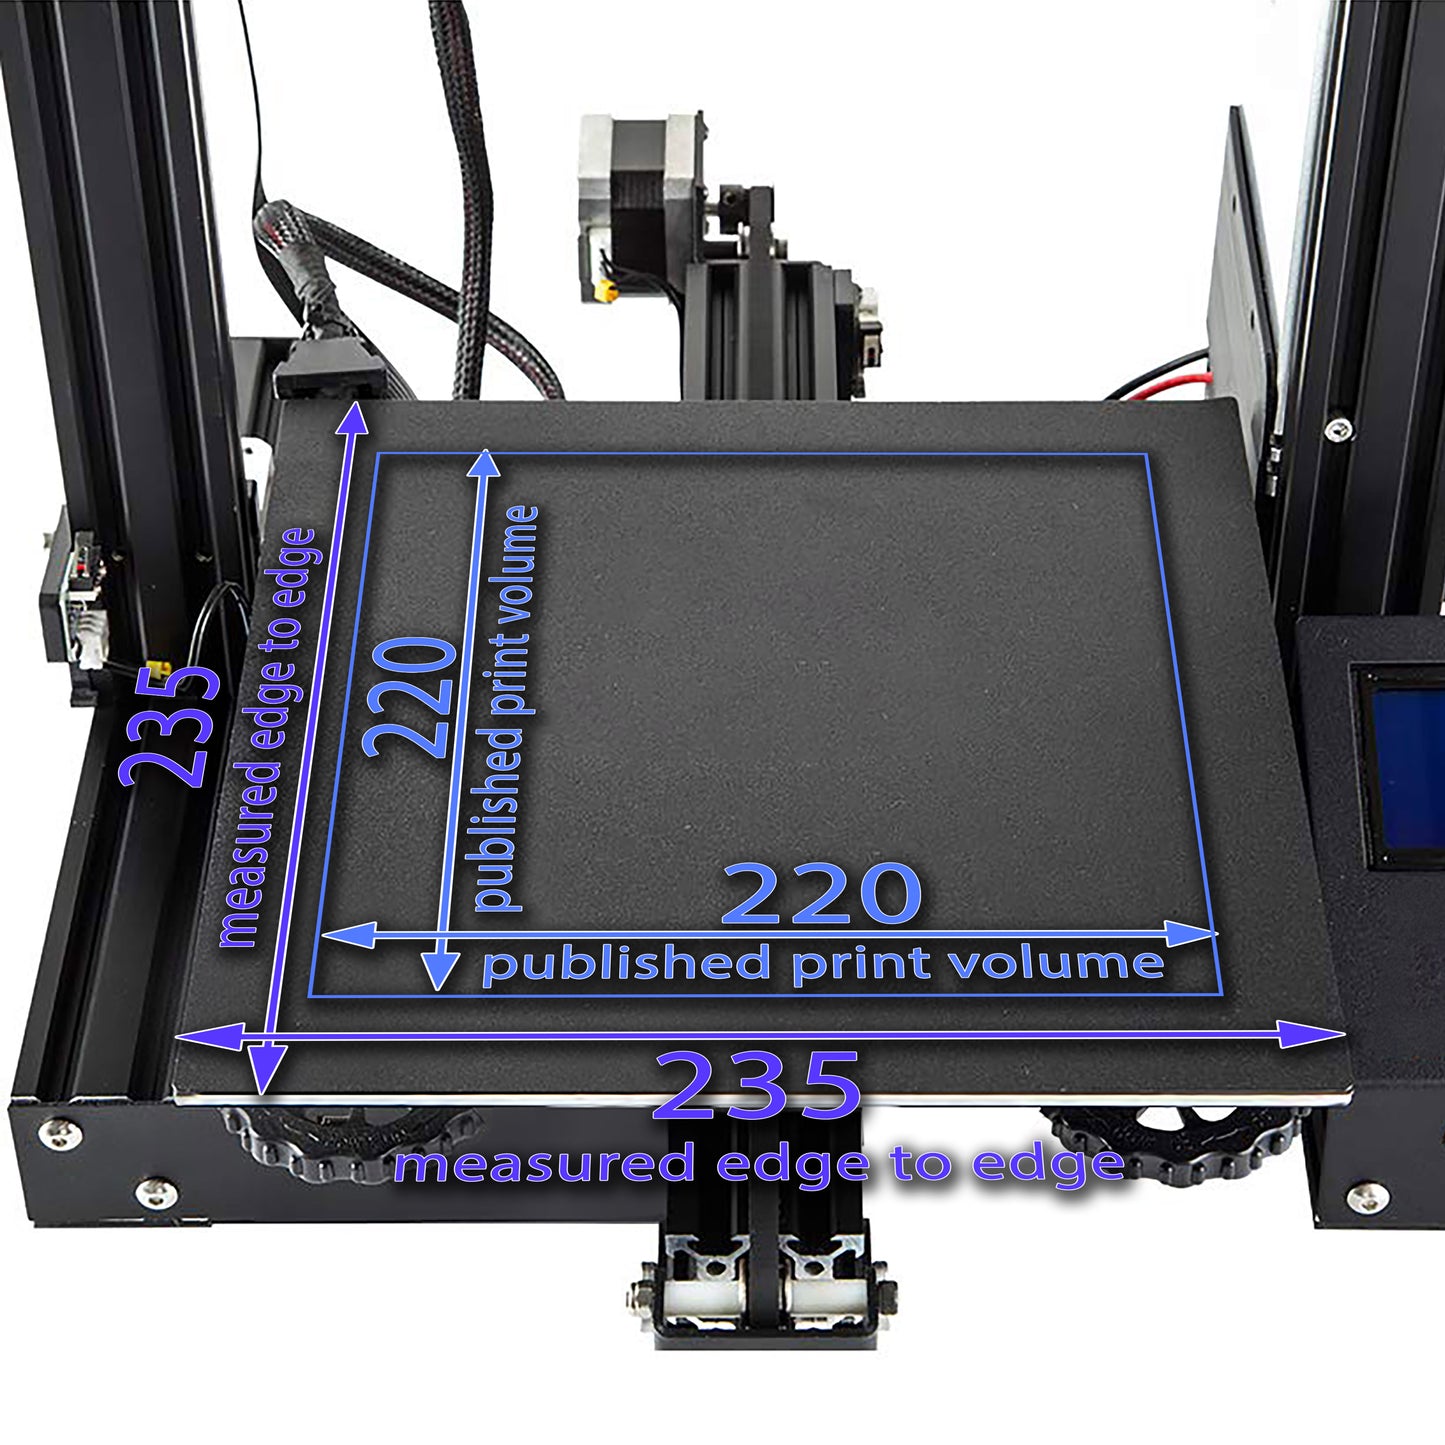 315 x 310 Kit with Pre-Installed PEX Build Surface - Creality K1 Max, Ender 3 S1 Plus, CR10 Smart Pro